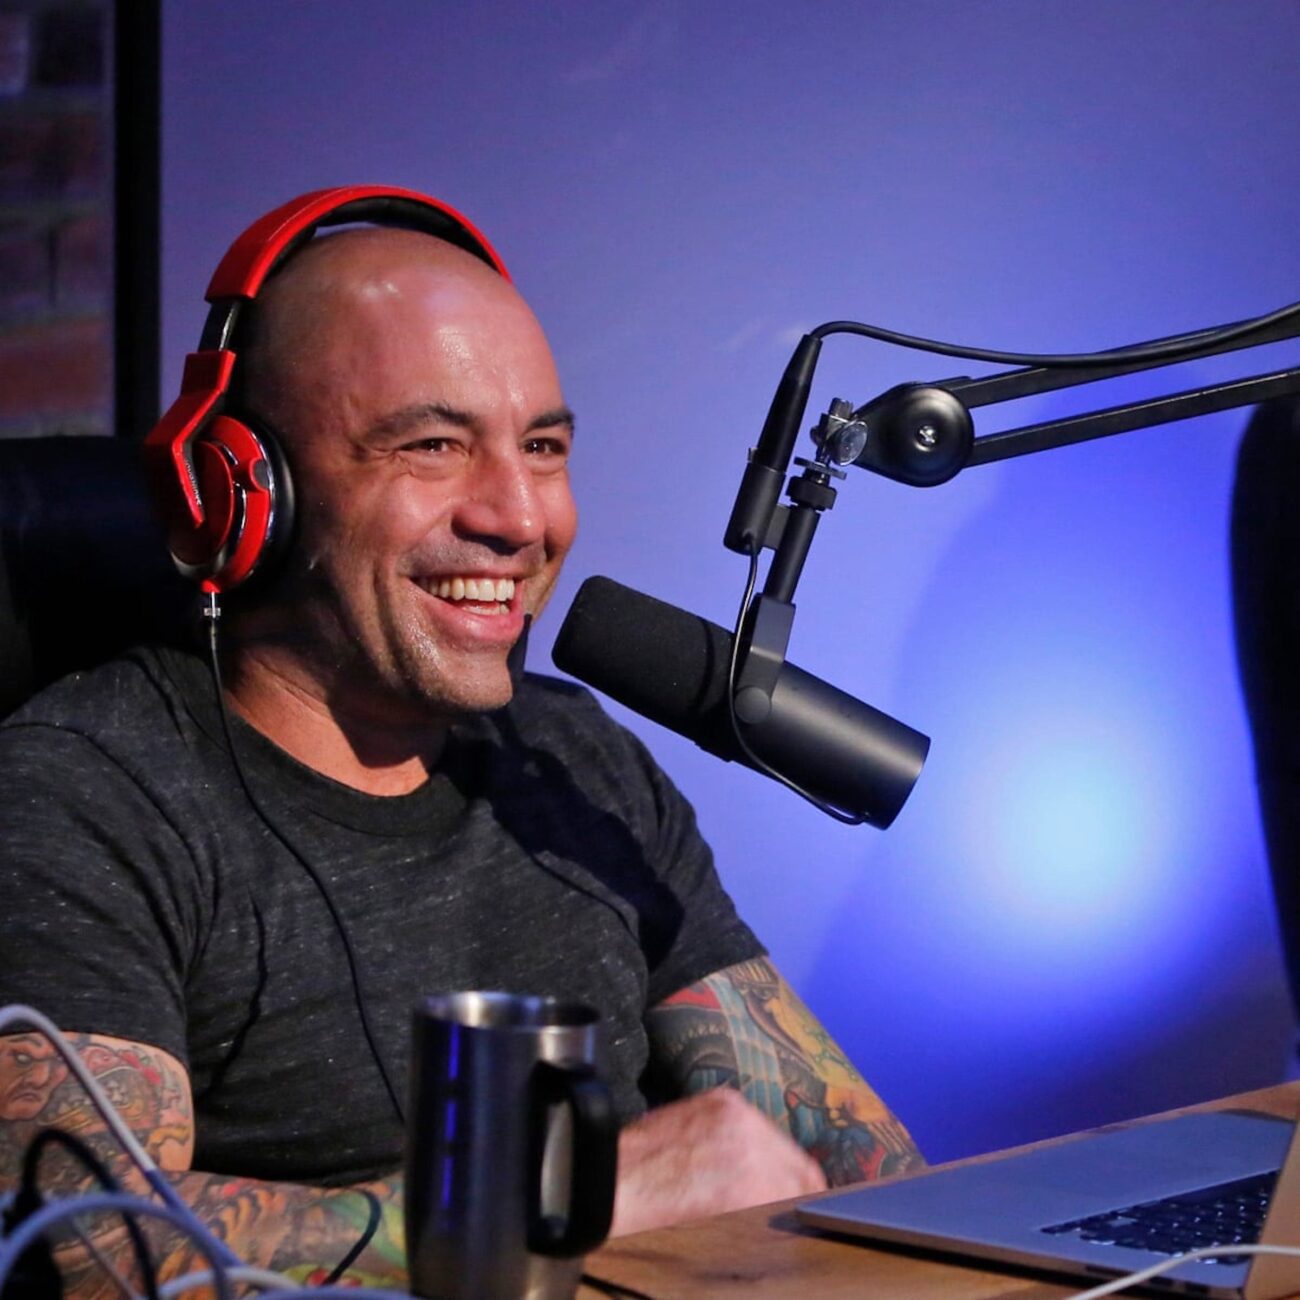 On the latest episode of his podcast, Joe Rogan discussed the recent media coverage on his use of ivermectin. Read why the host now wants to sue CNN.